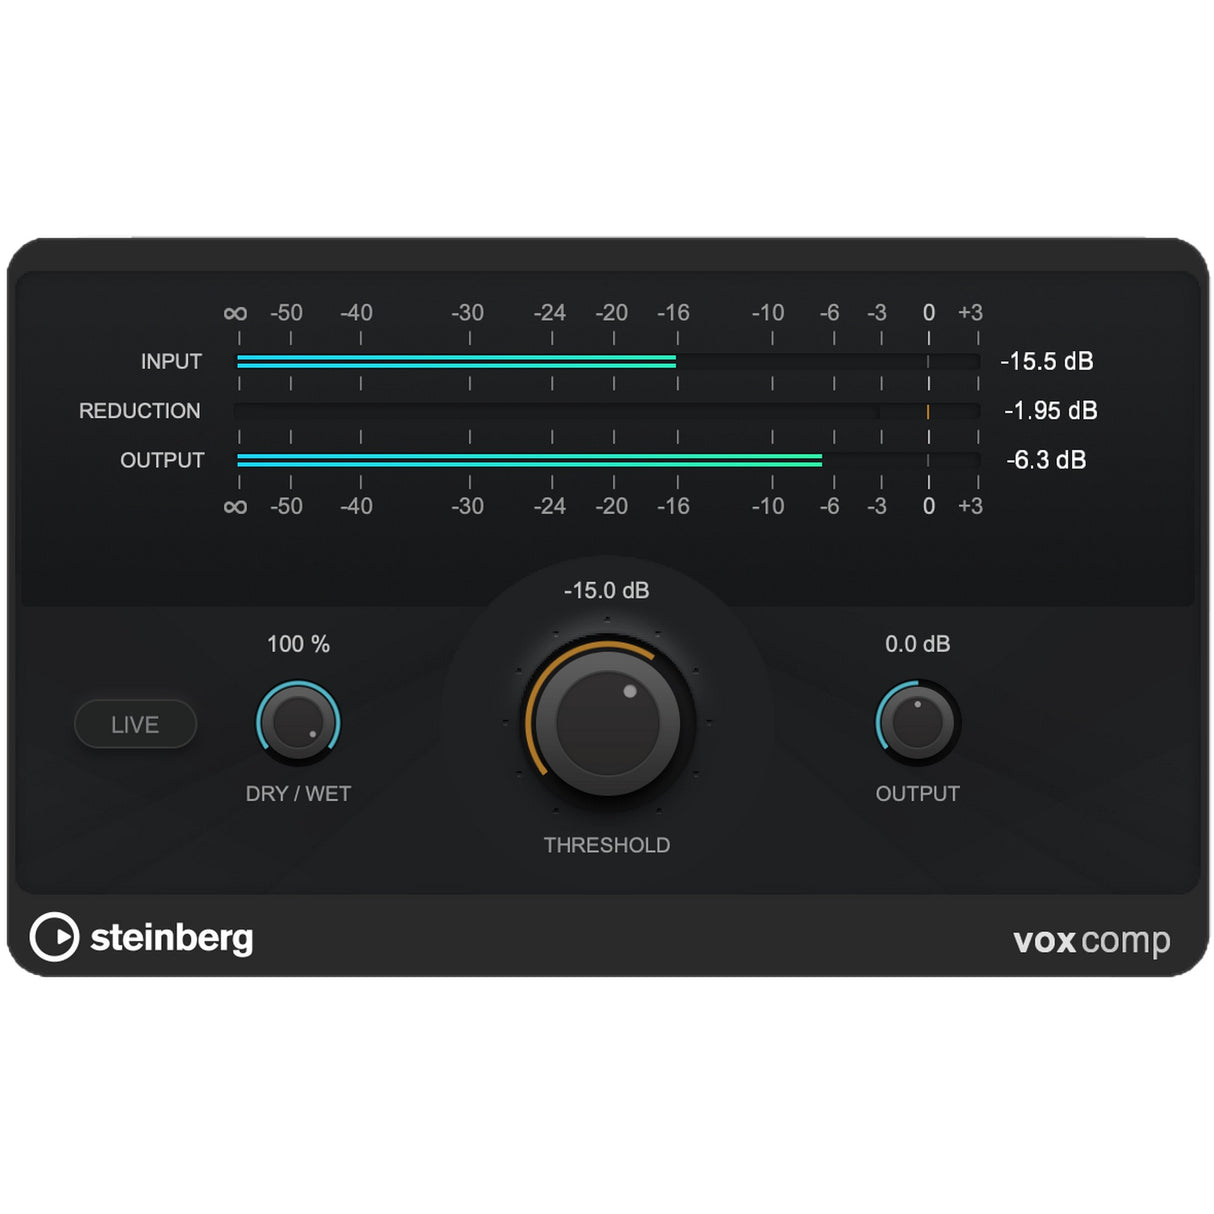 Steinberg Cubase Pro 13 Audio Post-Production Software, Upgrade from Cubase 6-12, School Site License Download